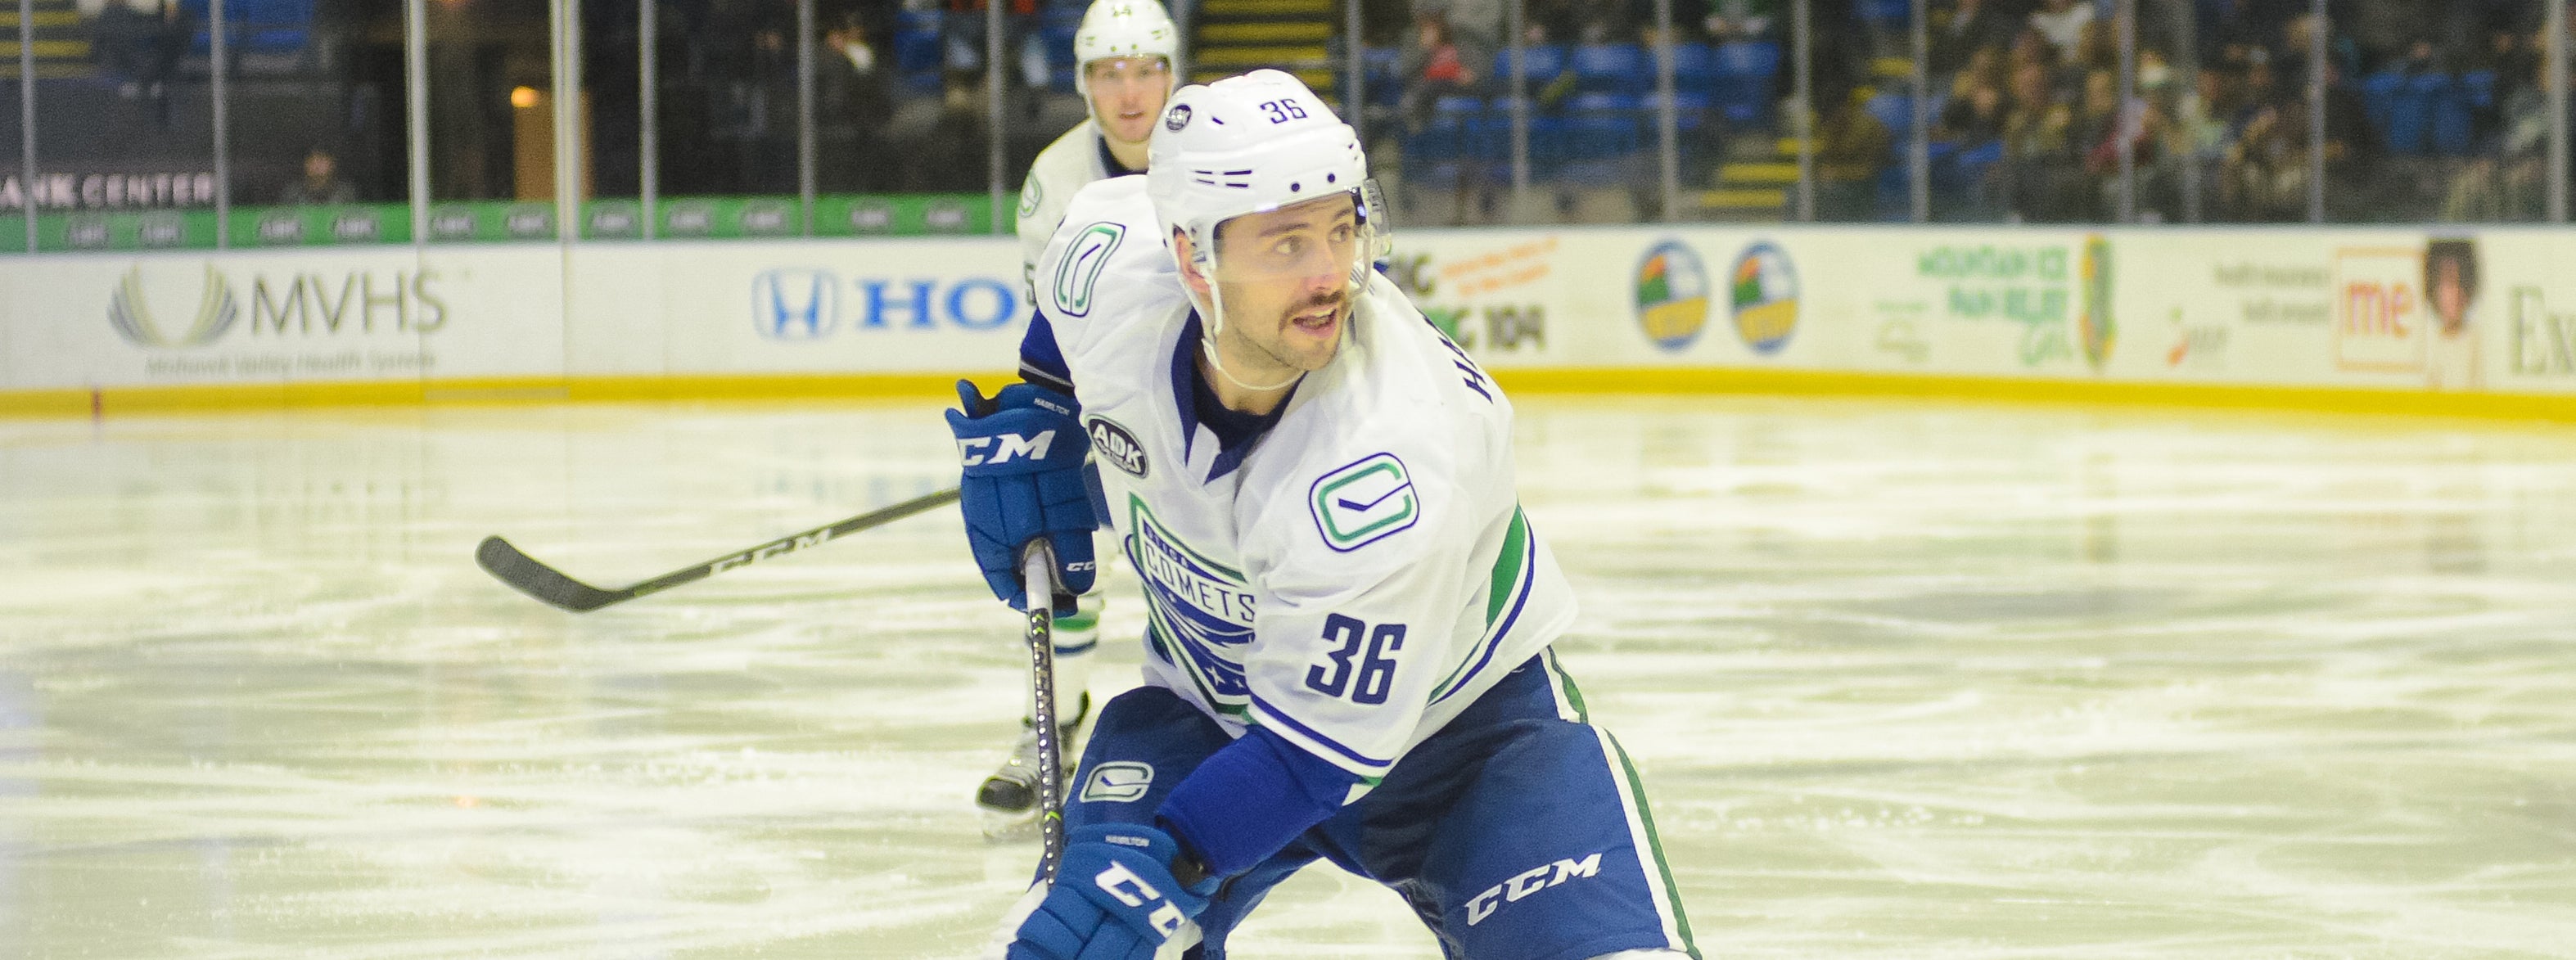 COMETS HEAD NORTH TO SQUARE OFF AGAINST ROCKET